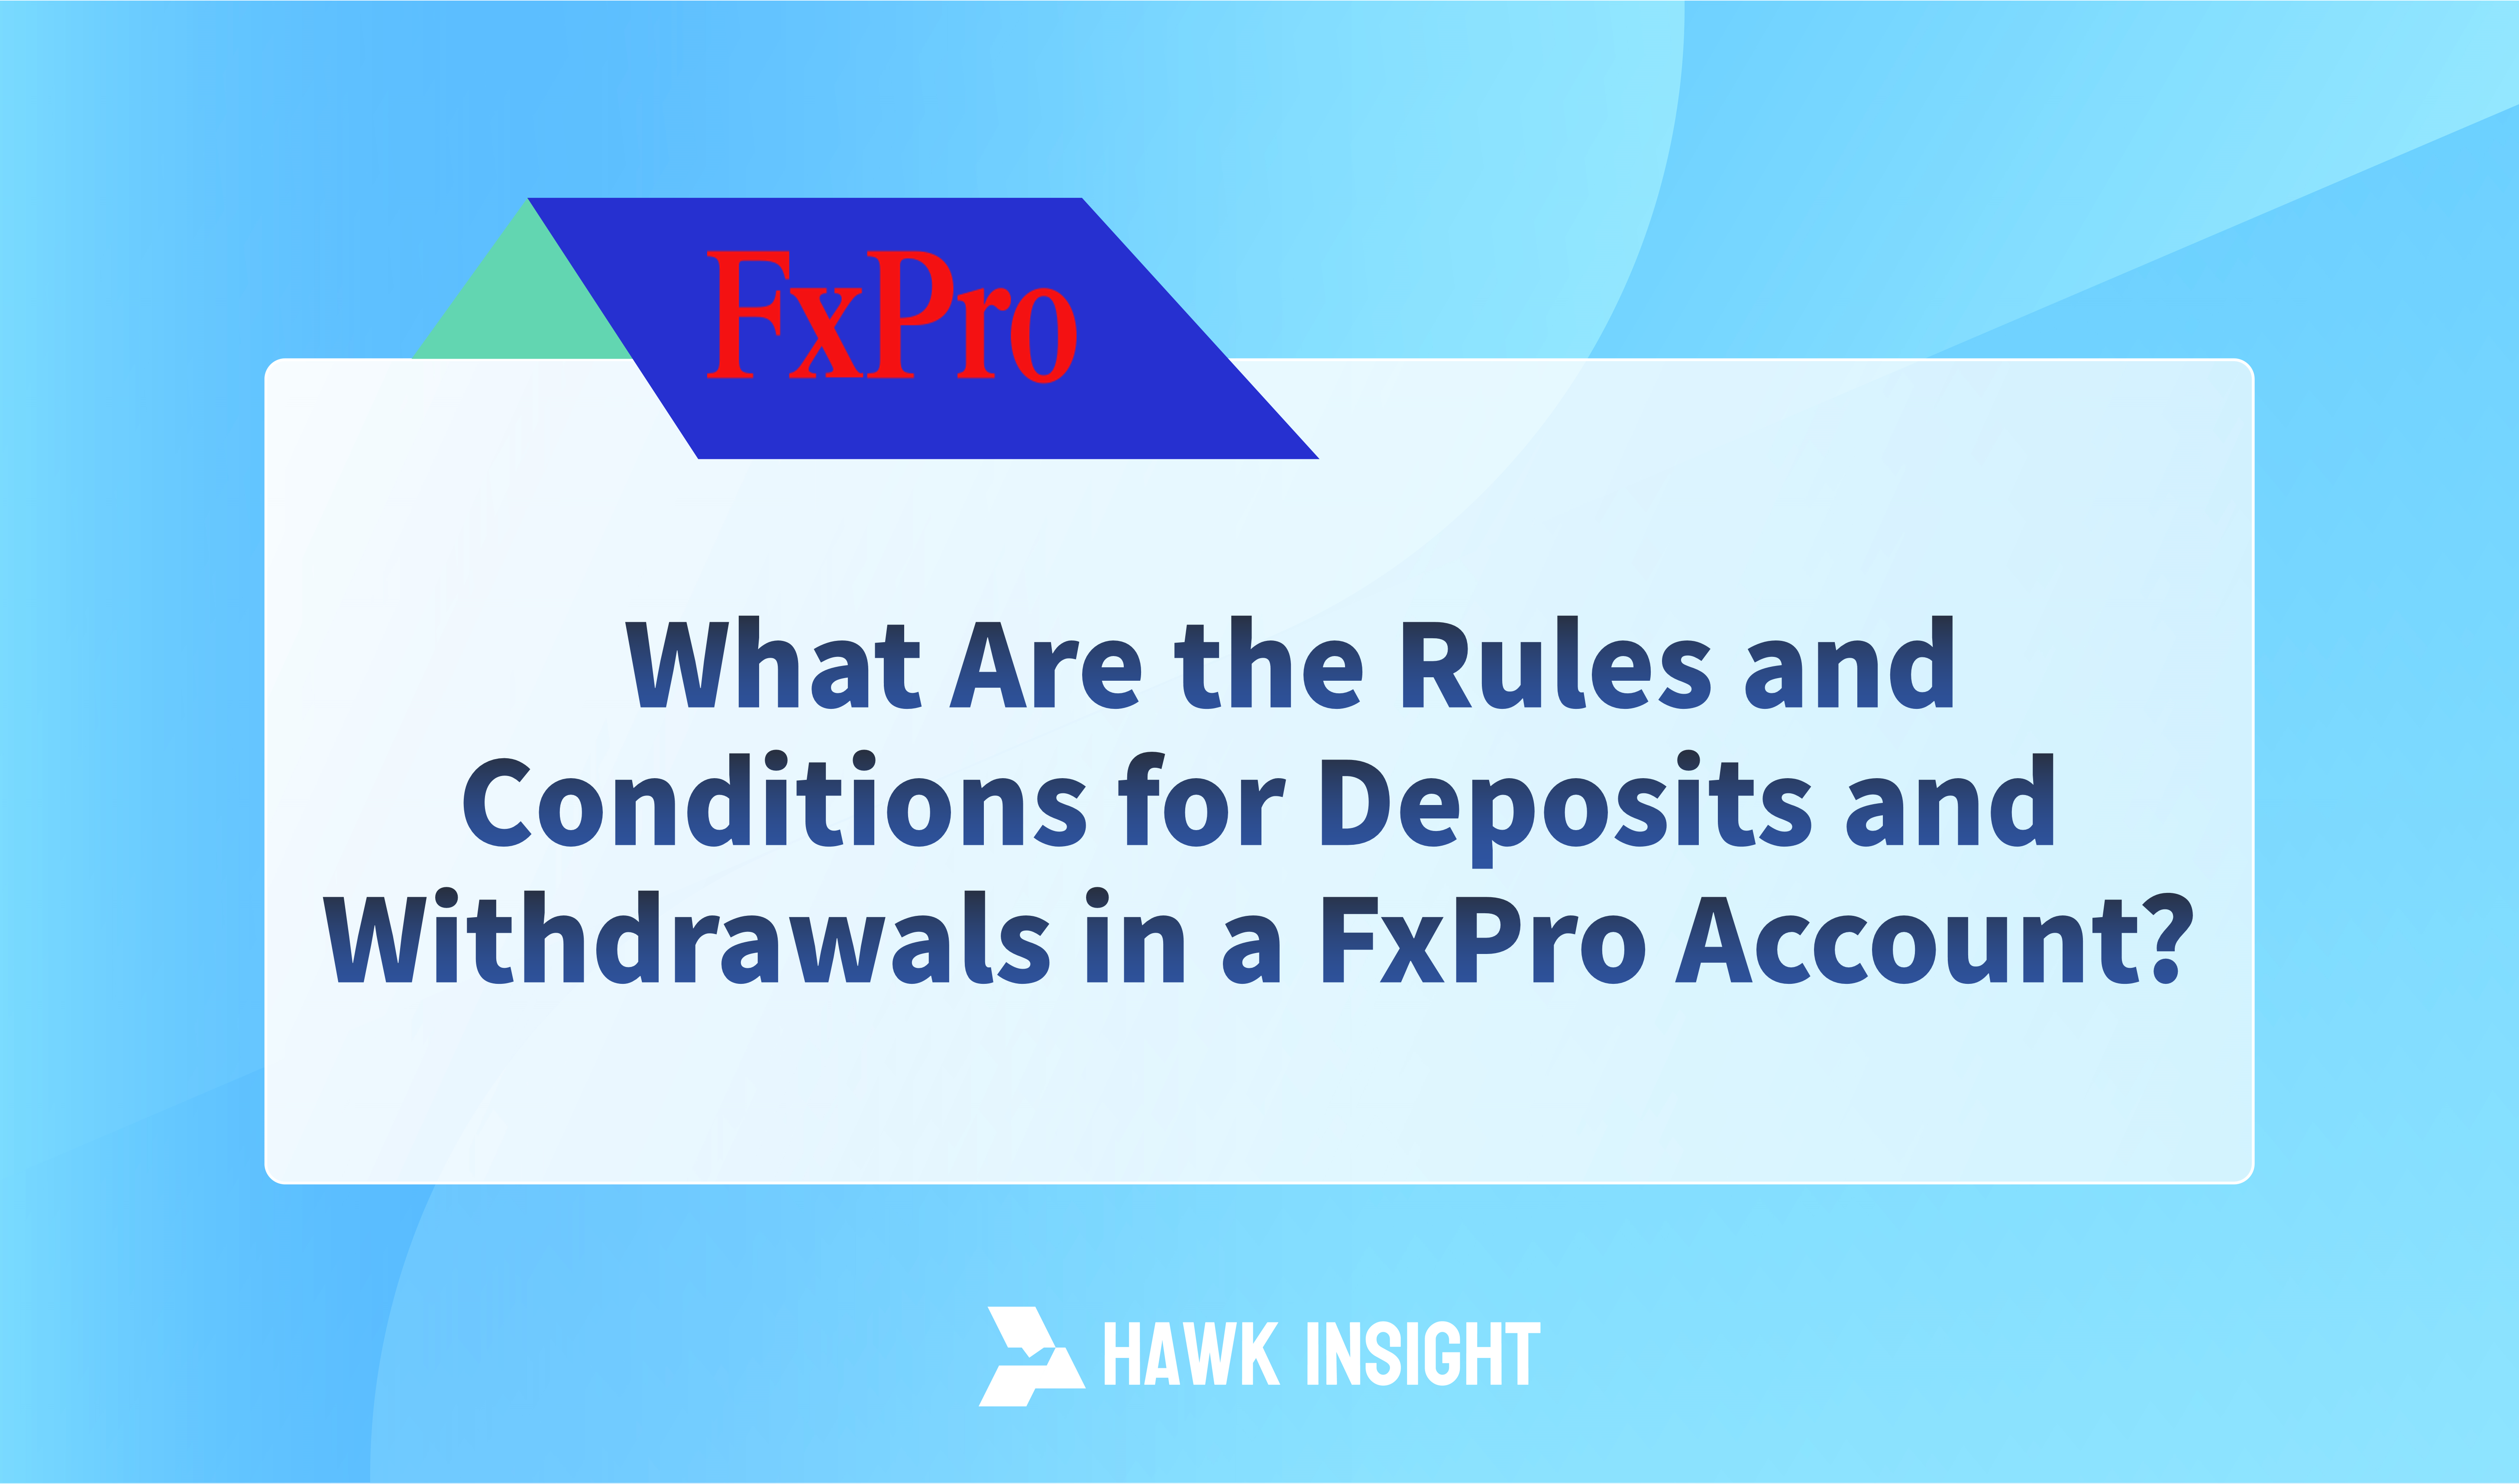 What Are the Rules and Conditions for Deposits and Withdrawals in a FxPro Account?